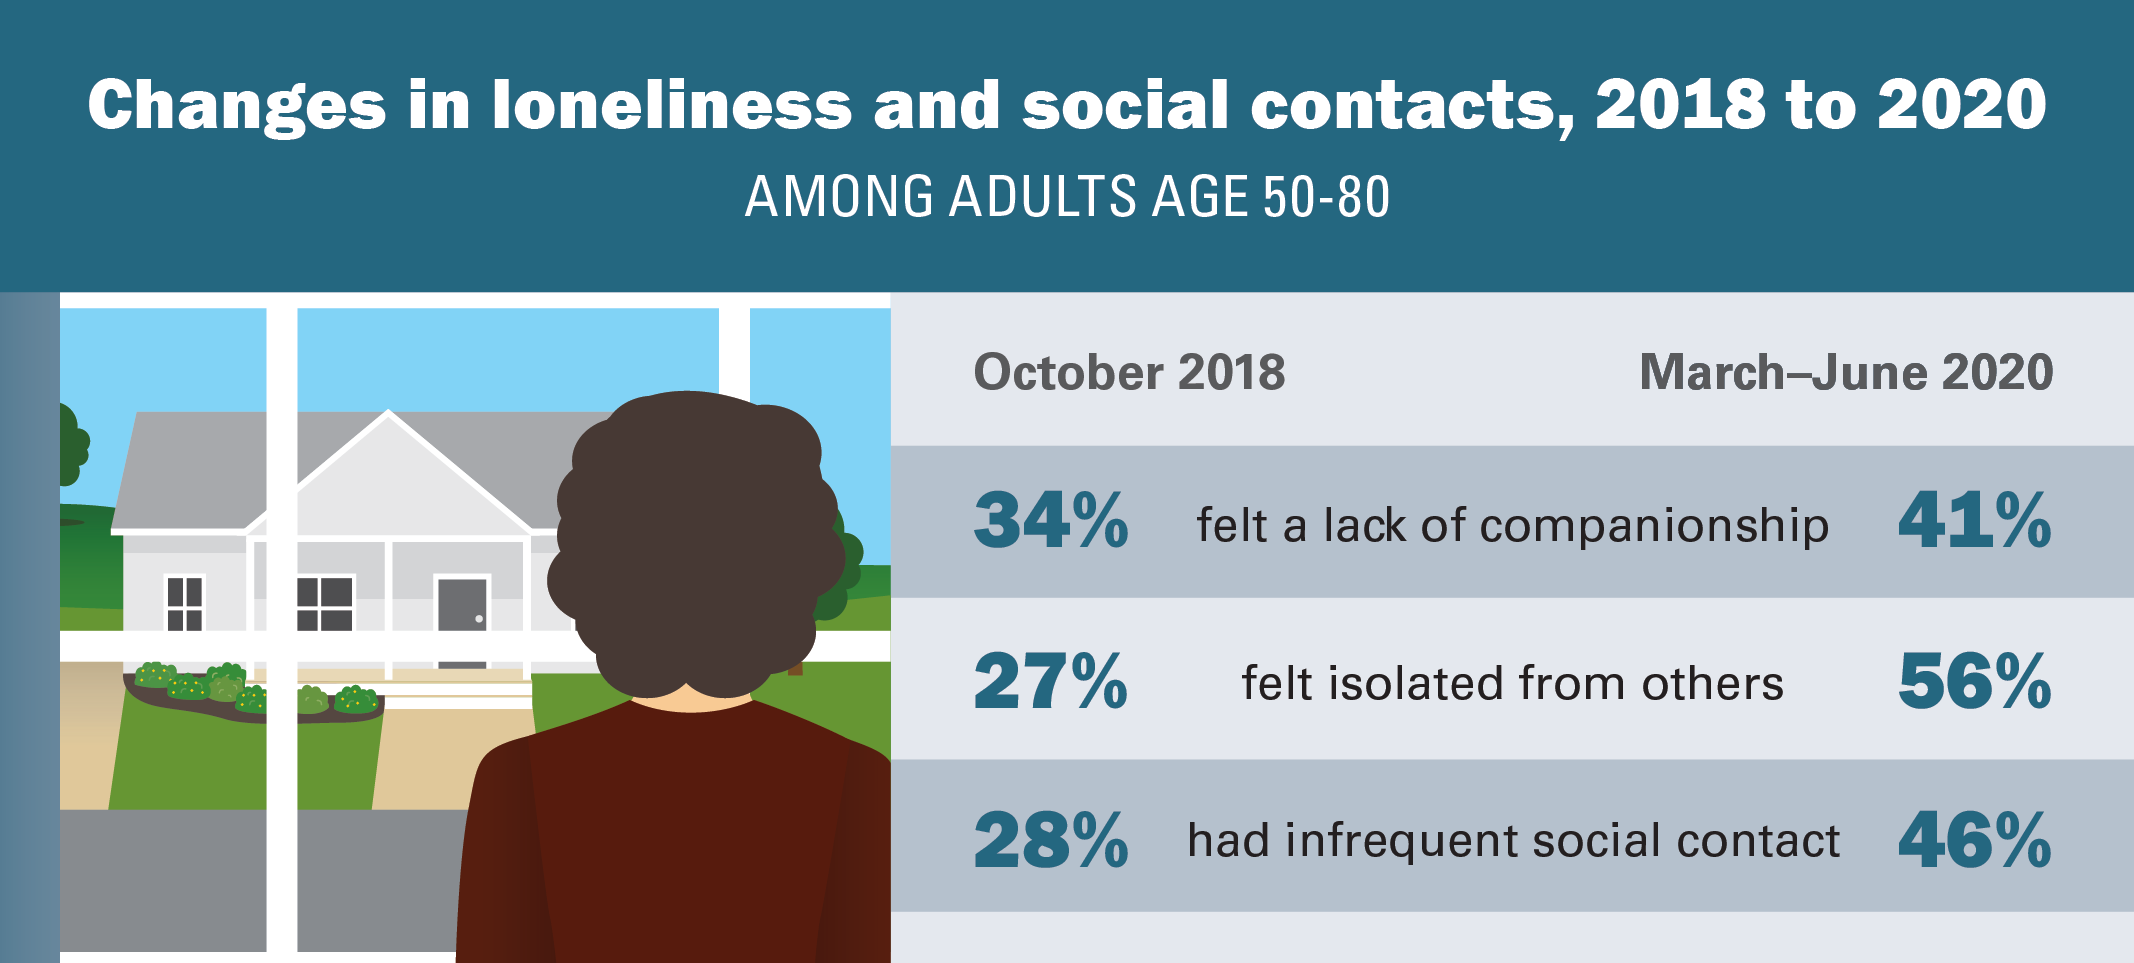 Changes in loneliness and social contracts, 2018 to 2020